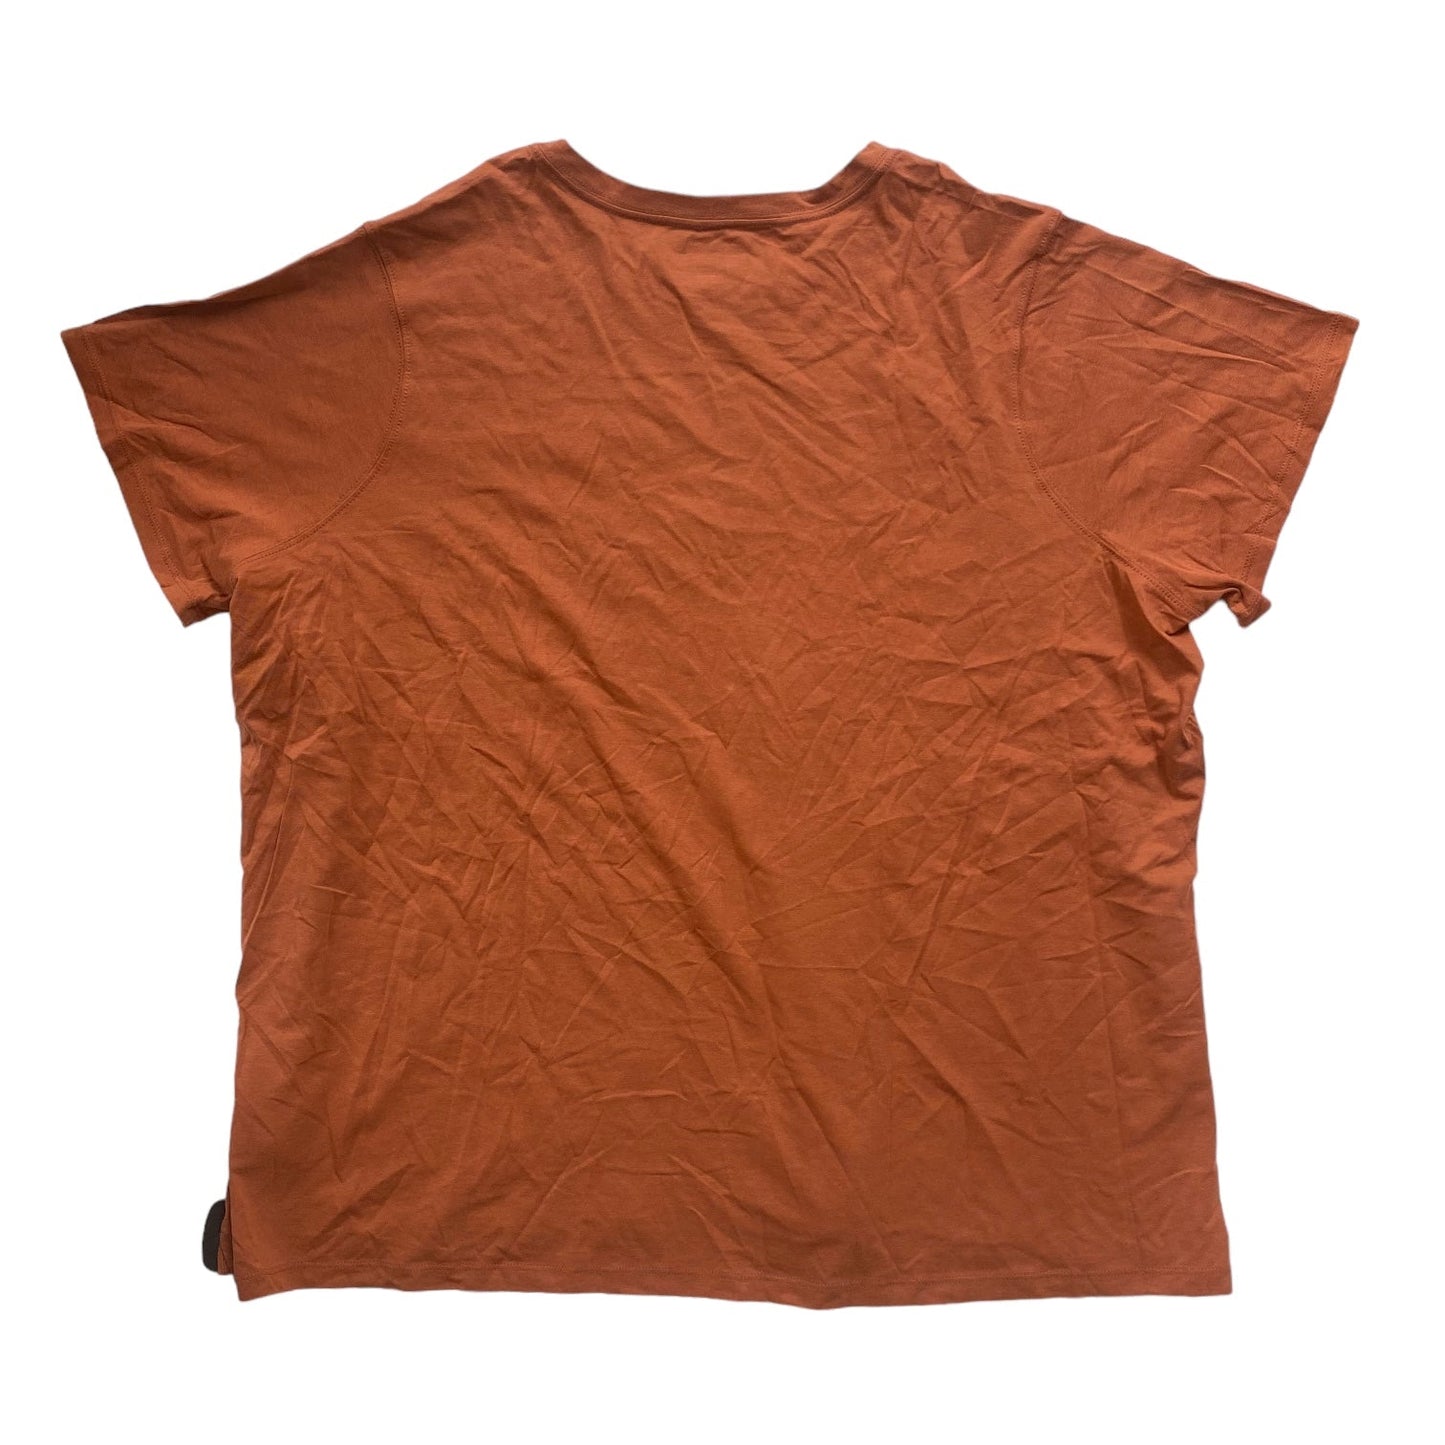 Multi-colored Top Short Sleeve Carhartt, Size 3x